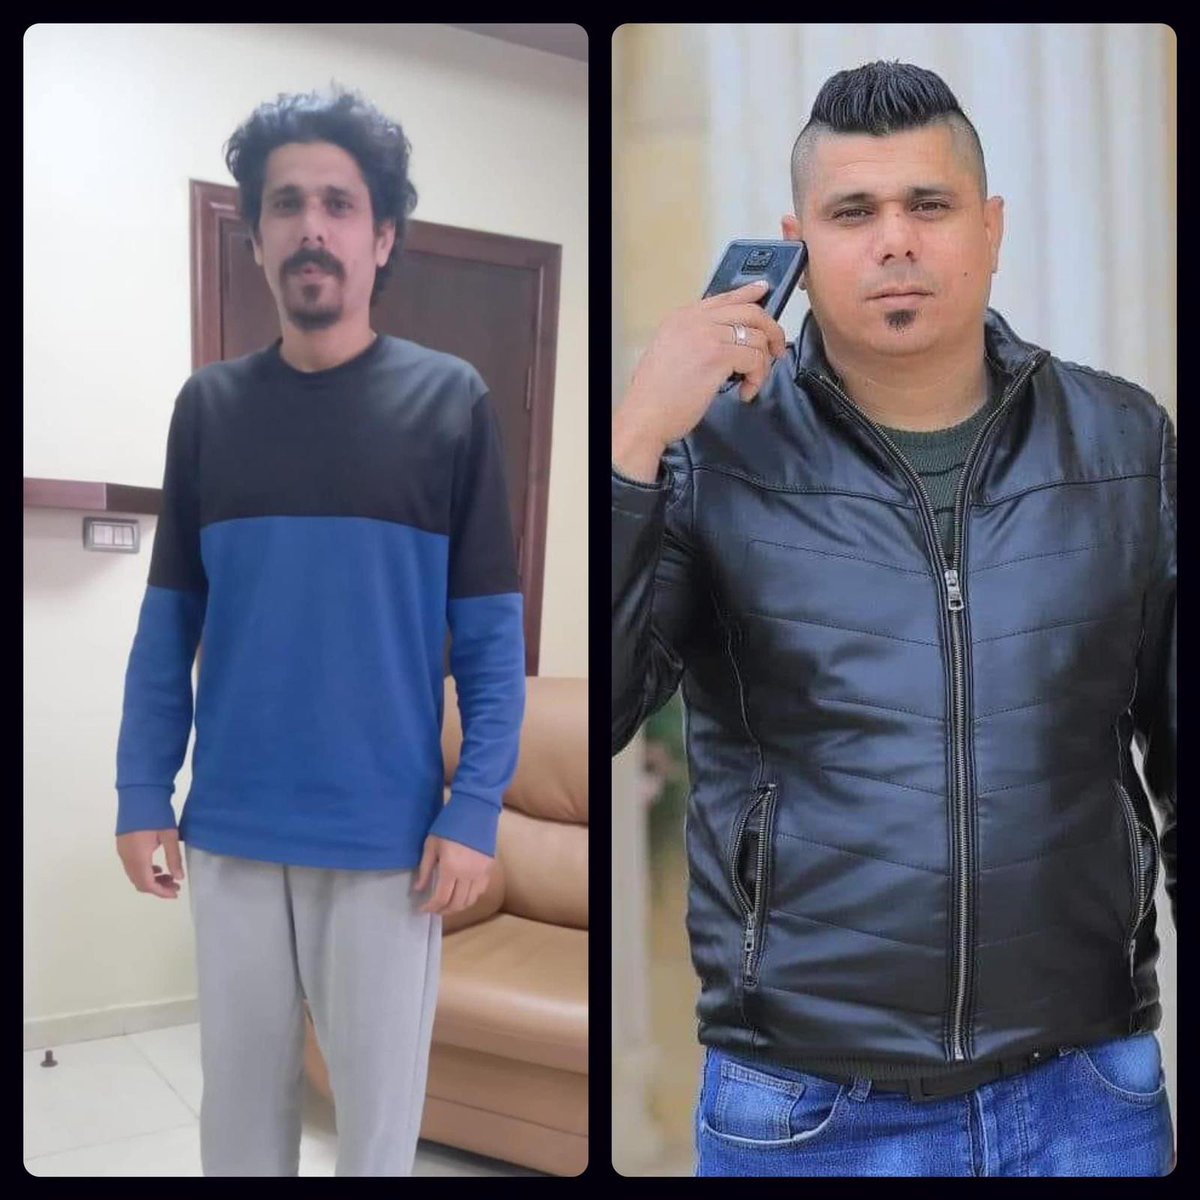 These are not two different individuals, but rather Mohammed Al-Baz, a Palestinian from the town of Qusin, west of Nablus, who was released today from Israeli occupation detention camps after months of torture and starvation.